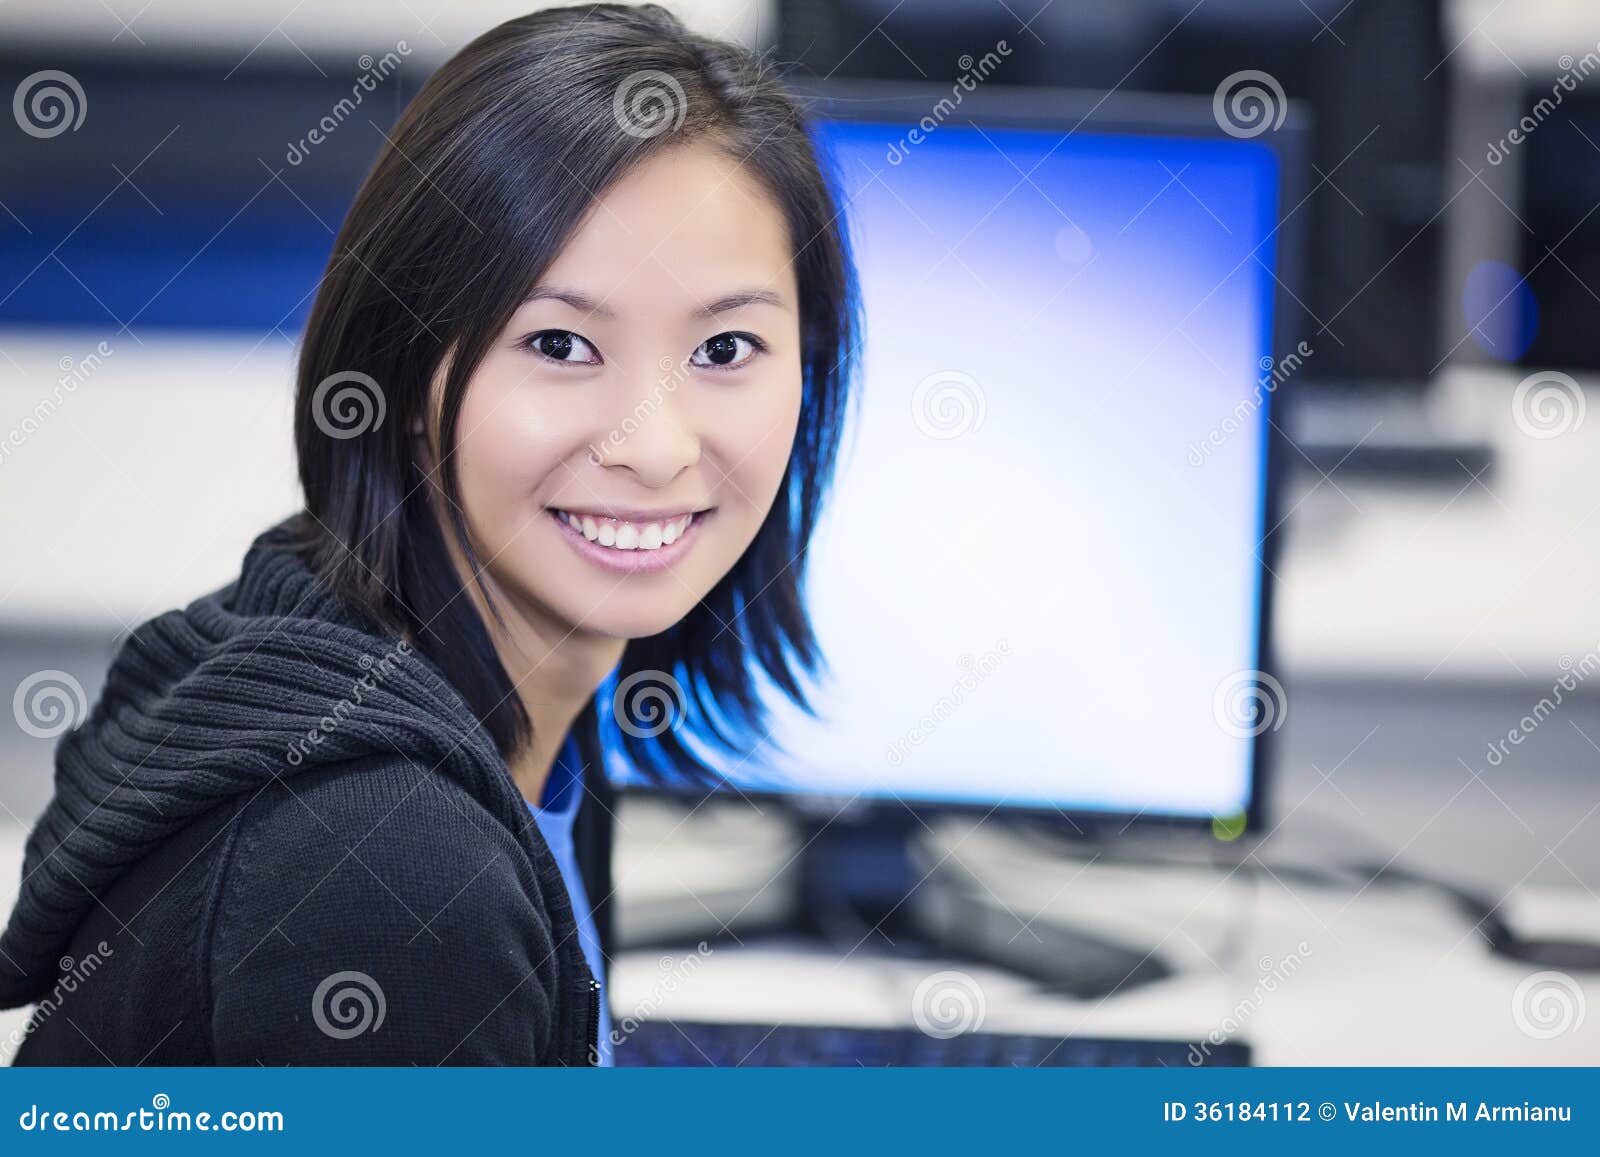 student in computer lab